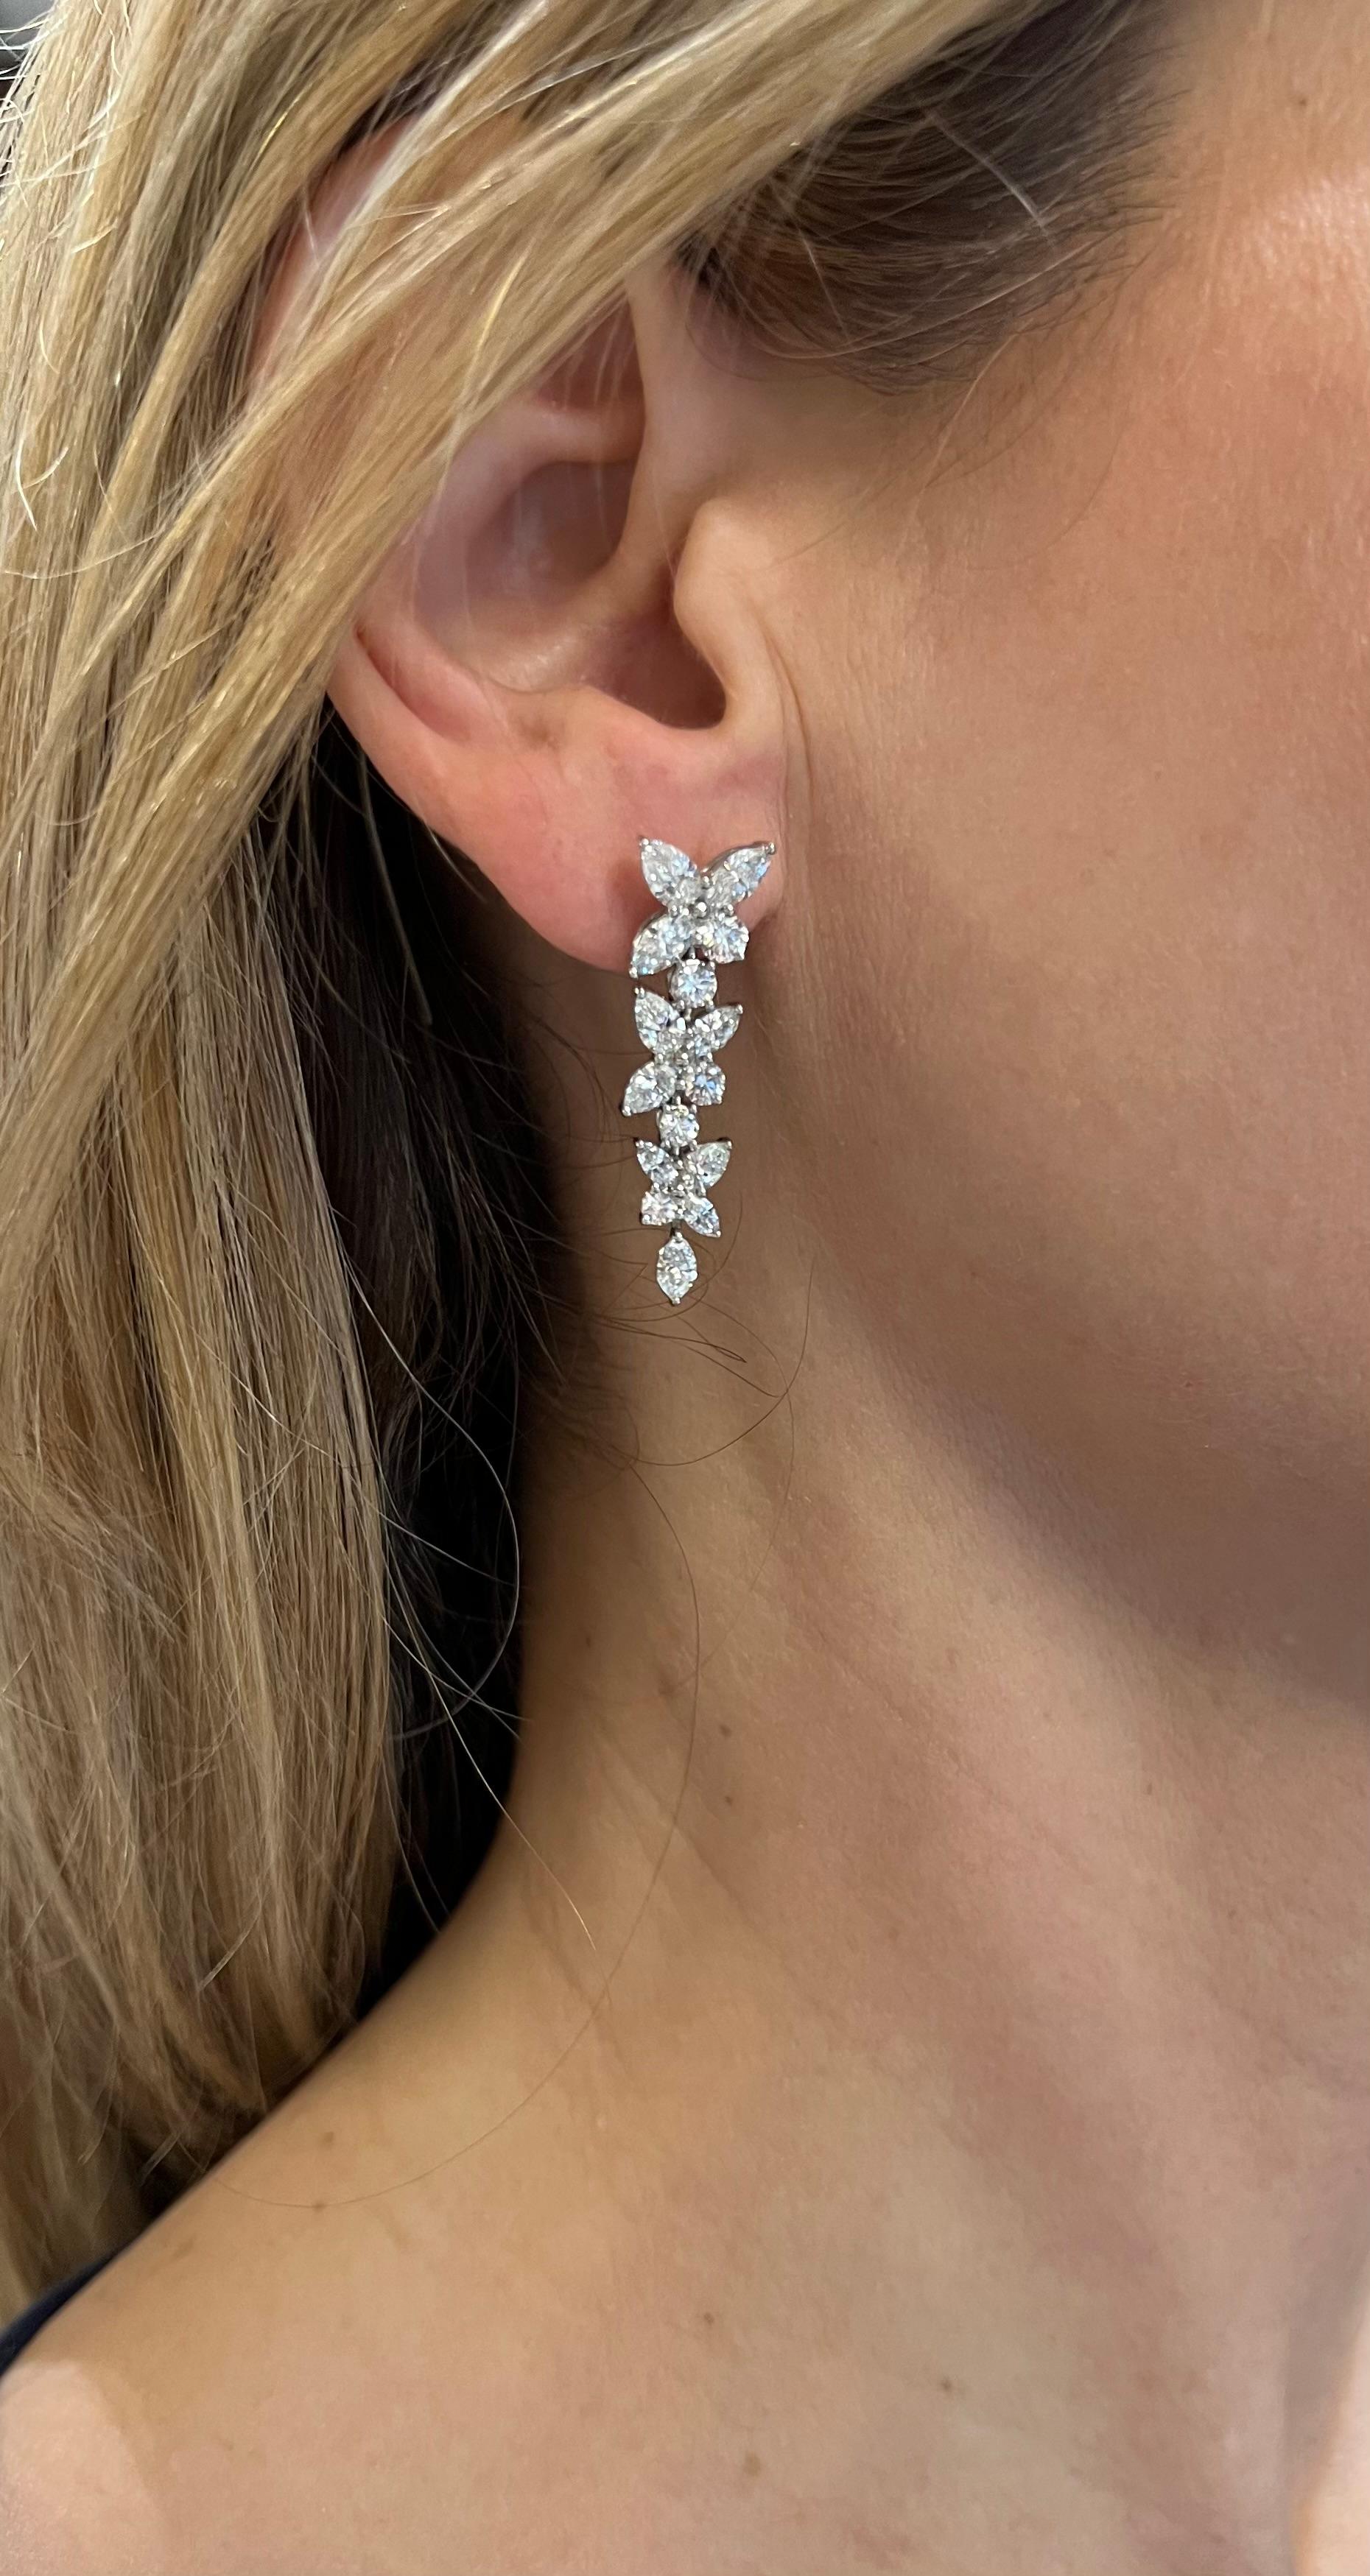 Set in platinum to create pieces that look like flowers, Tiffany & Co. 